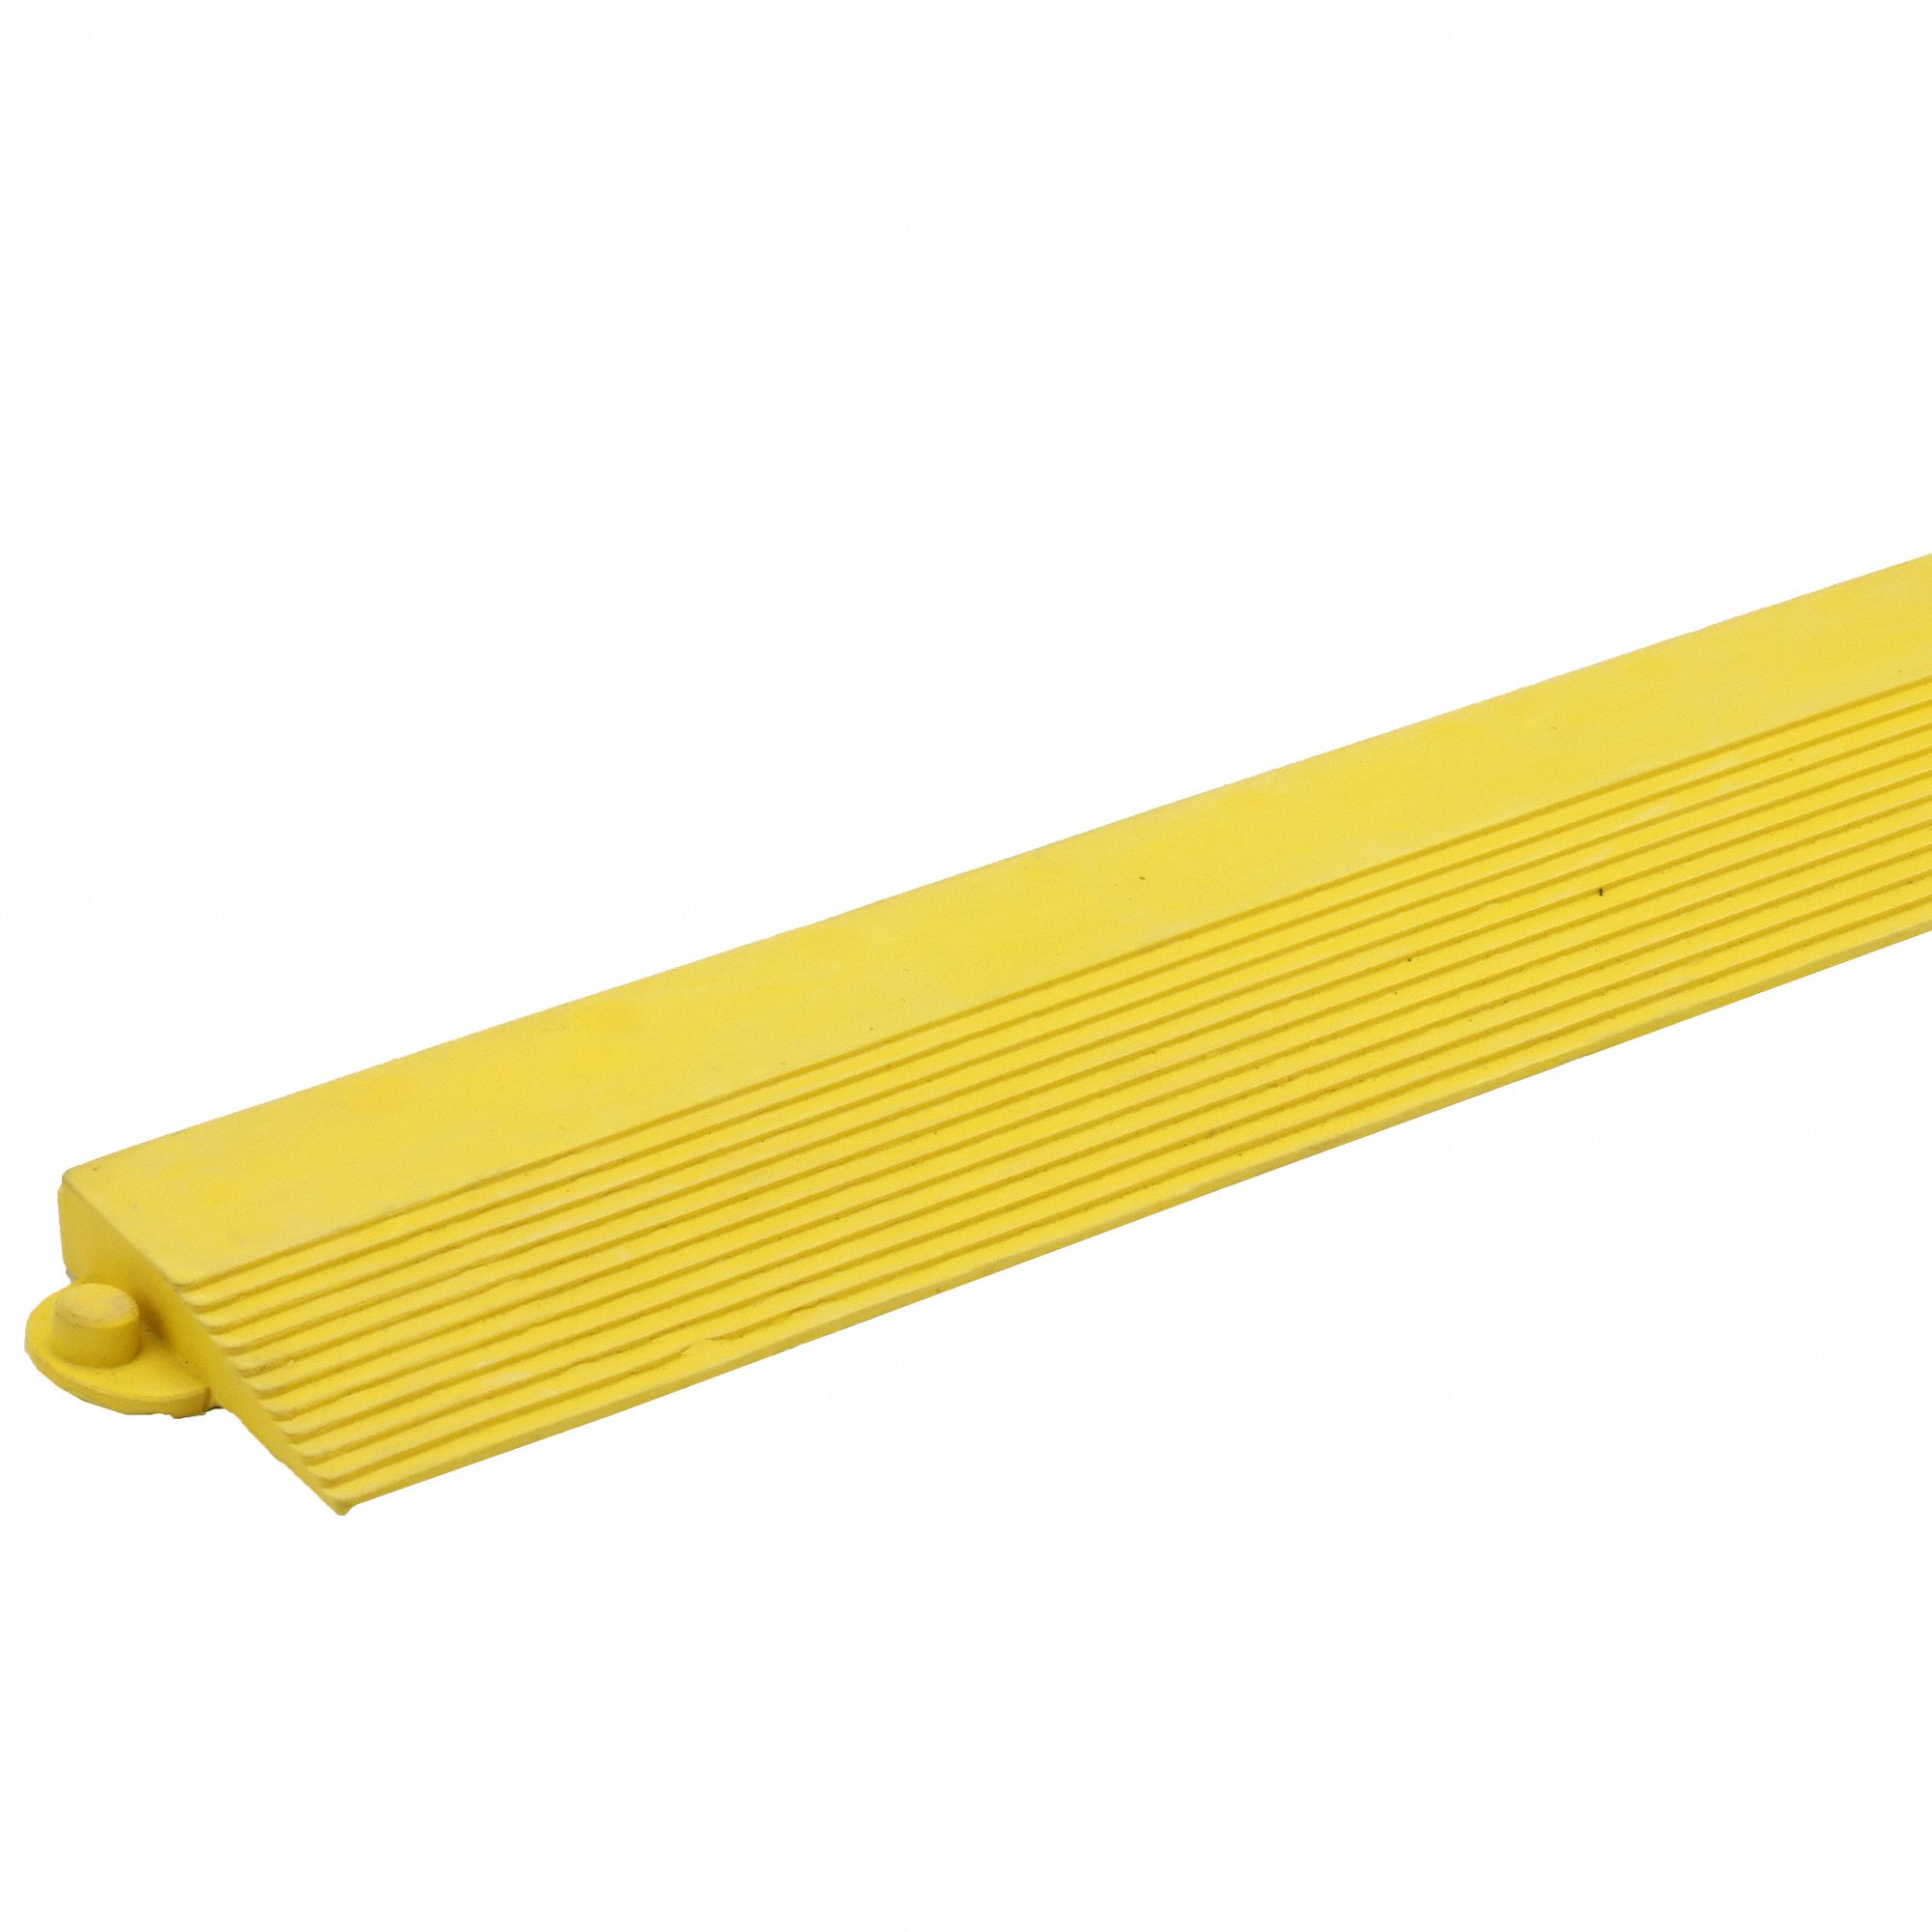 24/SEVEN RAMP EDGE, RAMP EDGE, 3 X 39 IN, RIBBED, YELLOW, NATURAL RUBBER